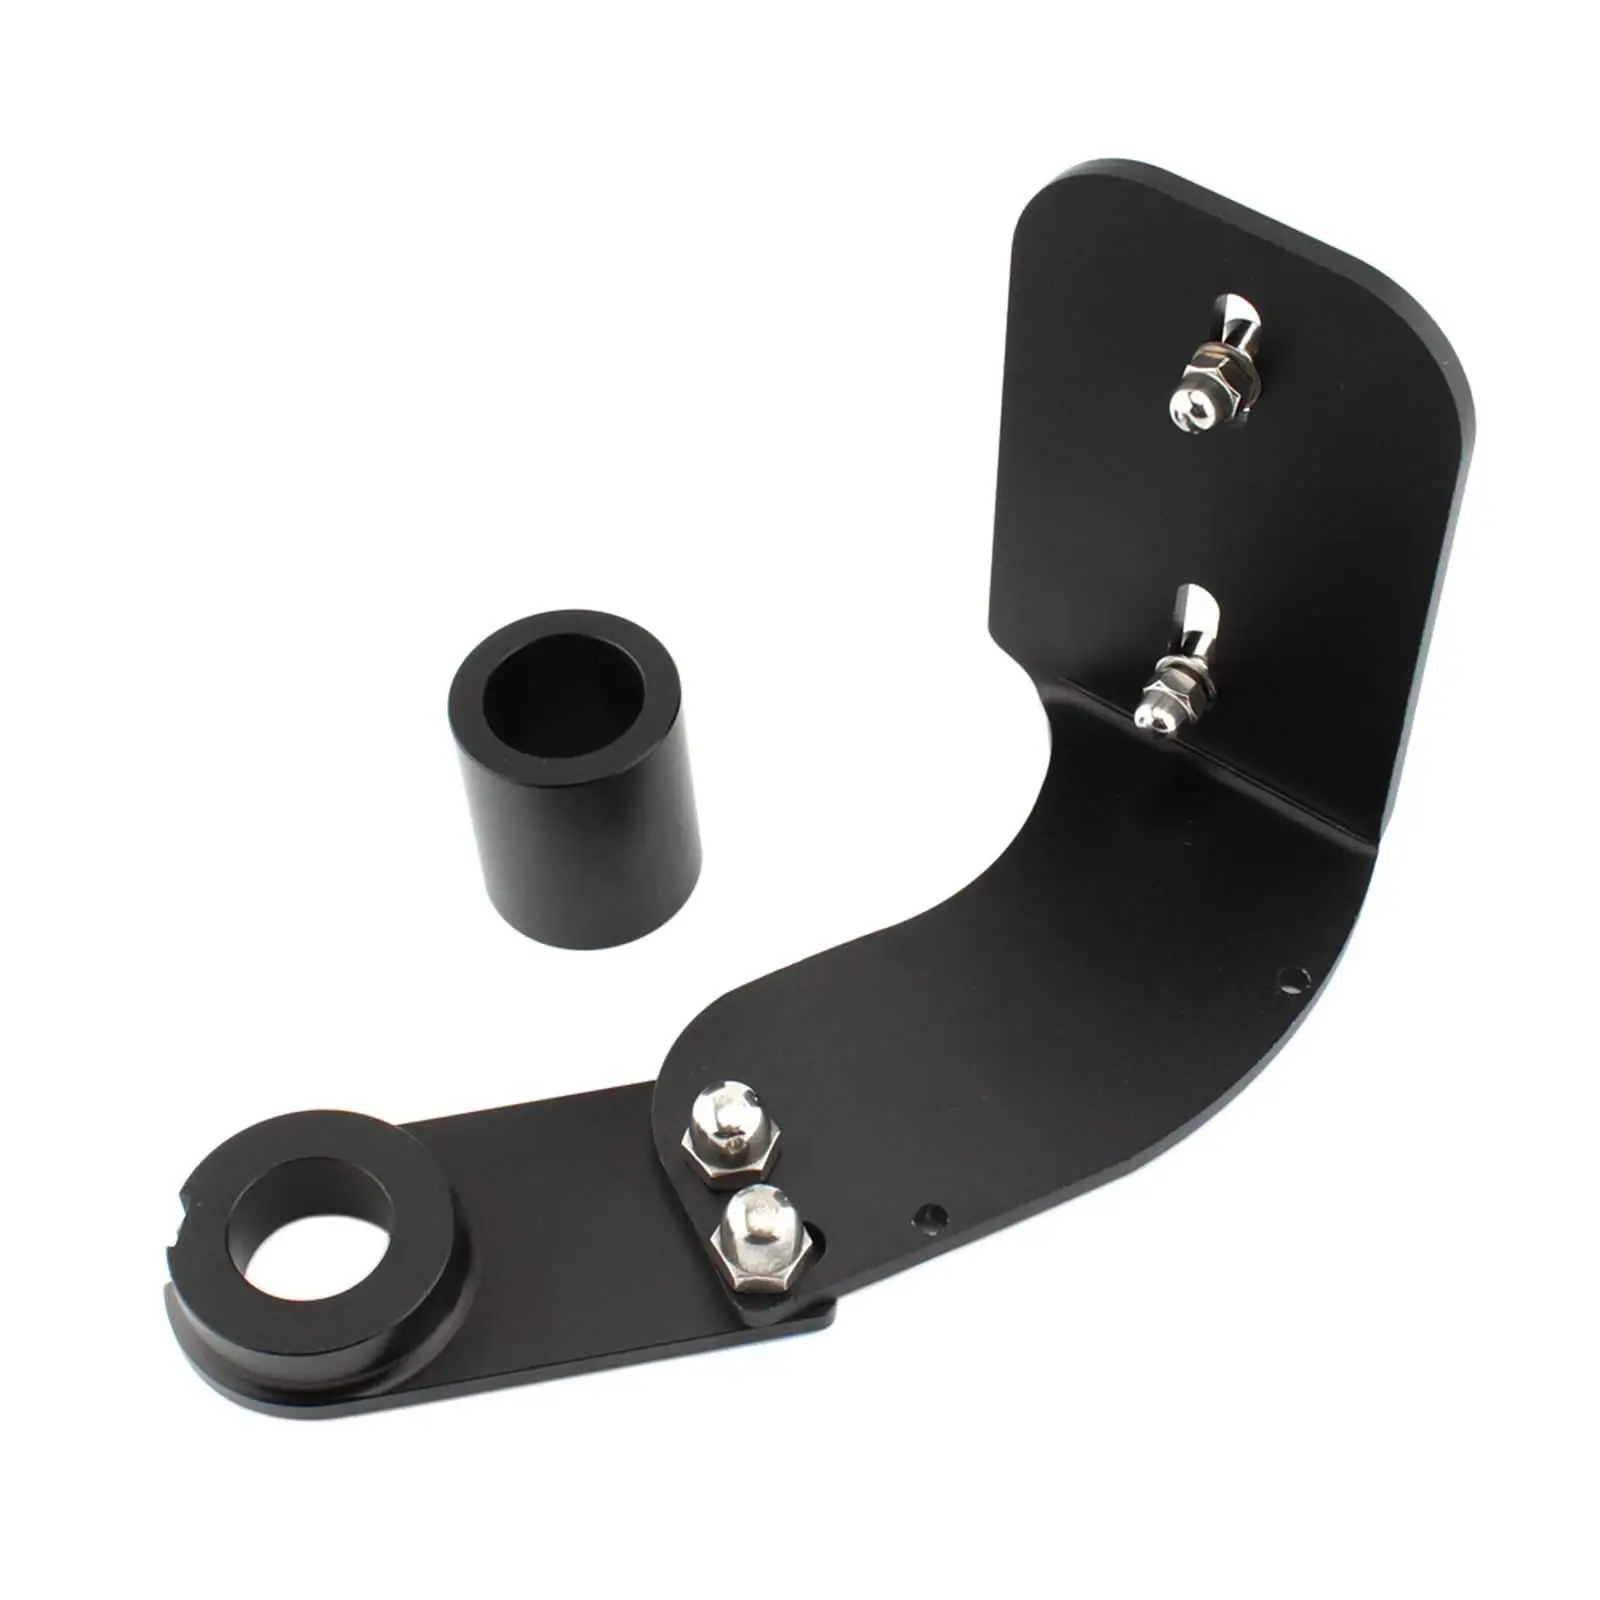 Motorcycle Modified Side License Plate Bracket for Fat Boy Durable